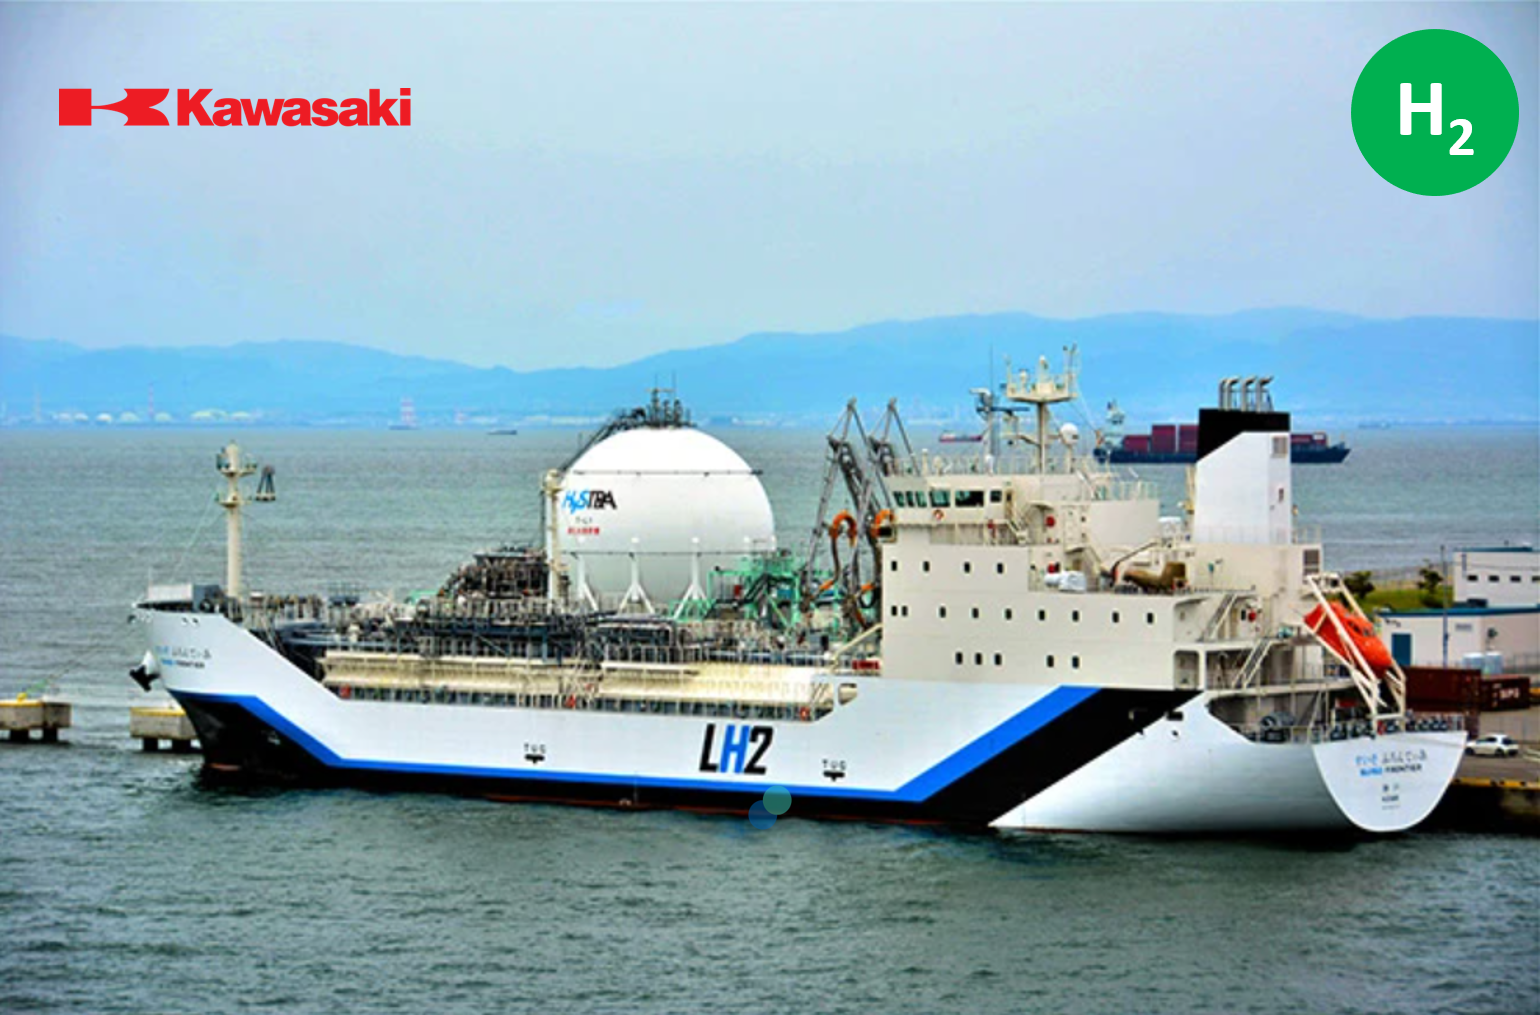 Kawasaki built this Liquified Hydrogen Tanker, the Suiso Frontier, for one voyage: Port of Hastings, Victoria to Kobe, Japan. It is a prototype for much larger vessels to transport hydrogen across oceans like LNG.